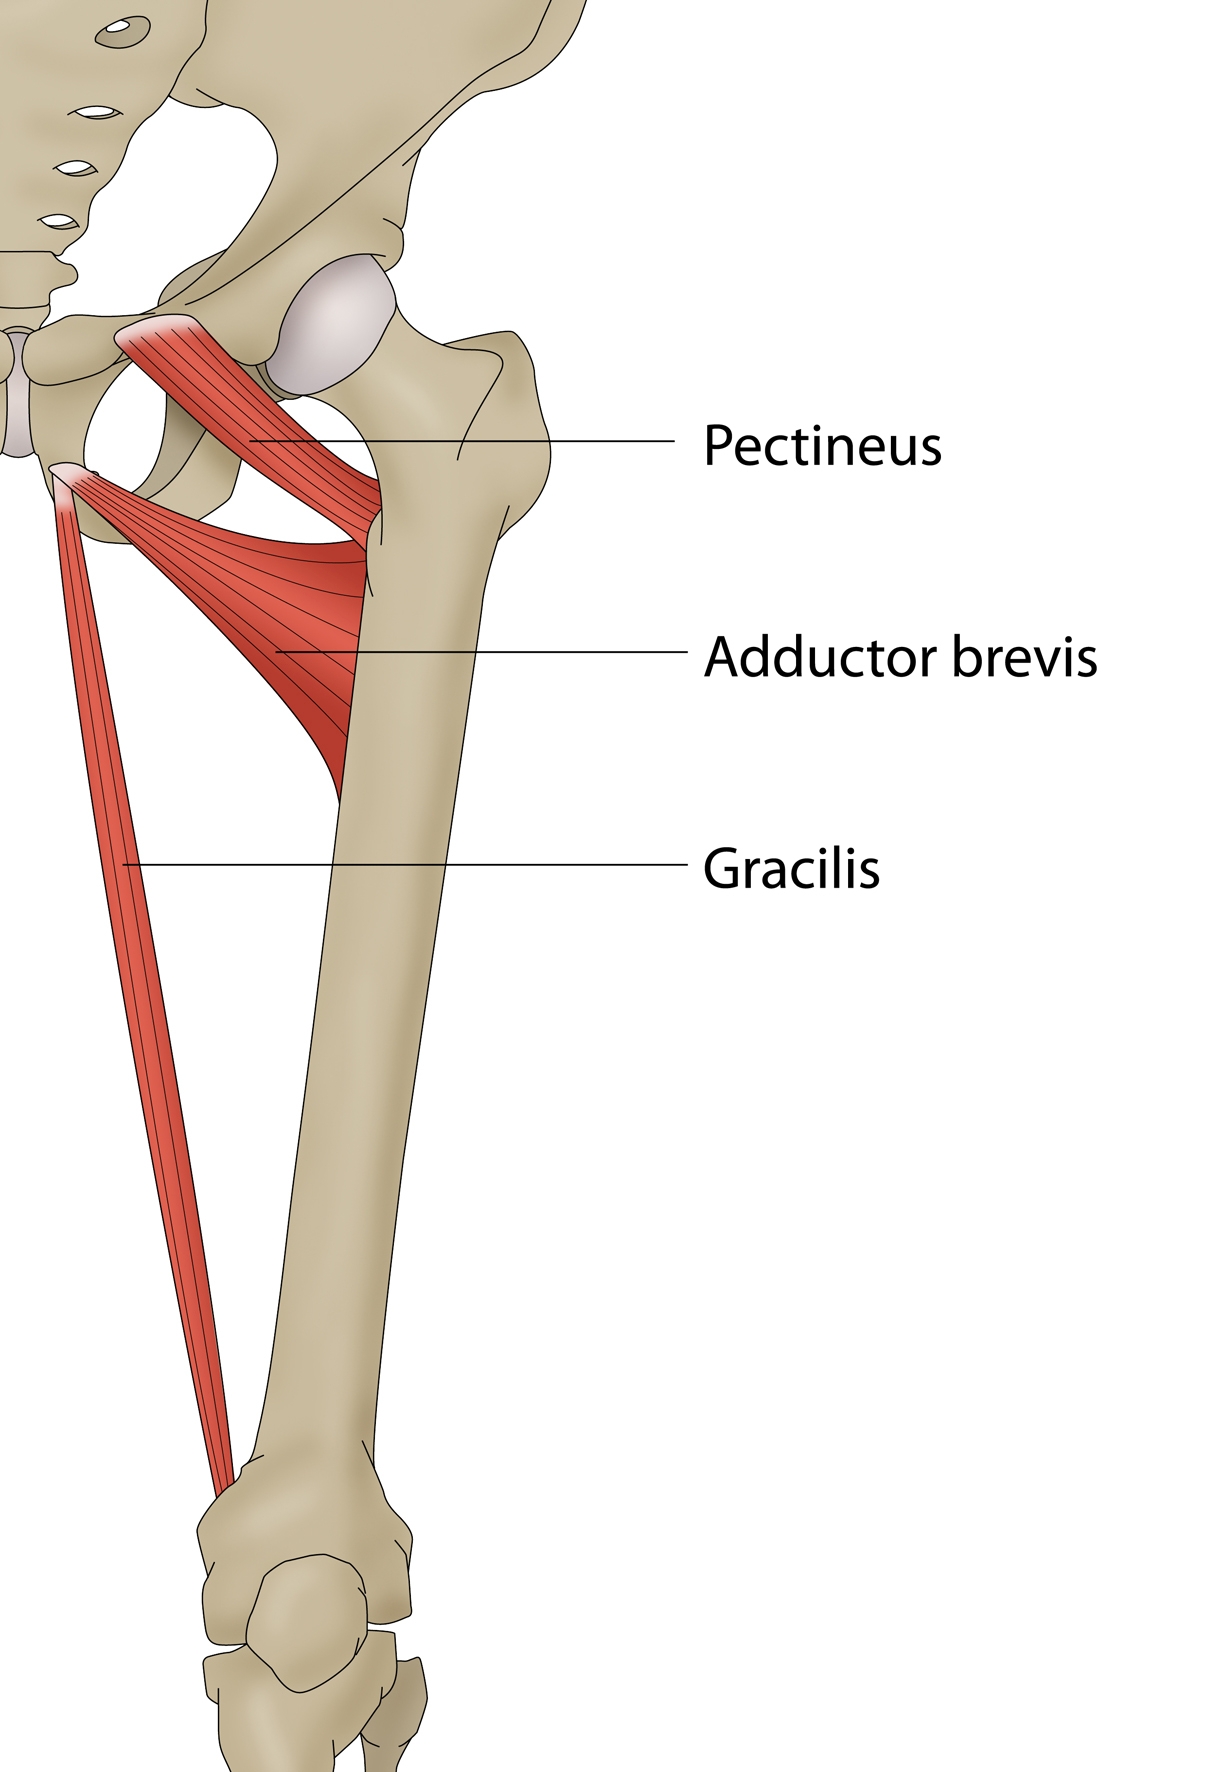 Figure 4b: Adductor brevis and gracilis insertion onto inferior pubic rami